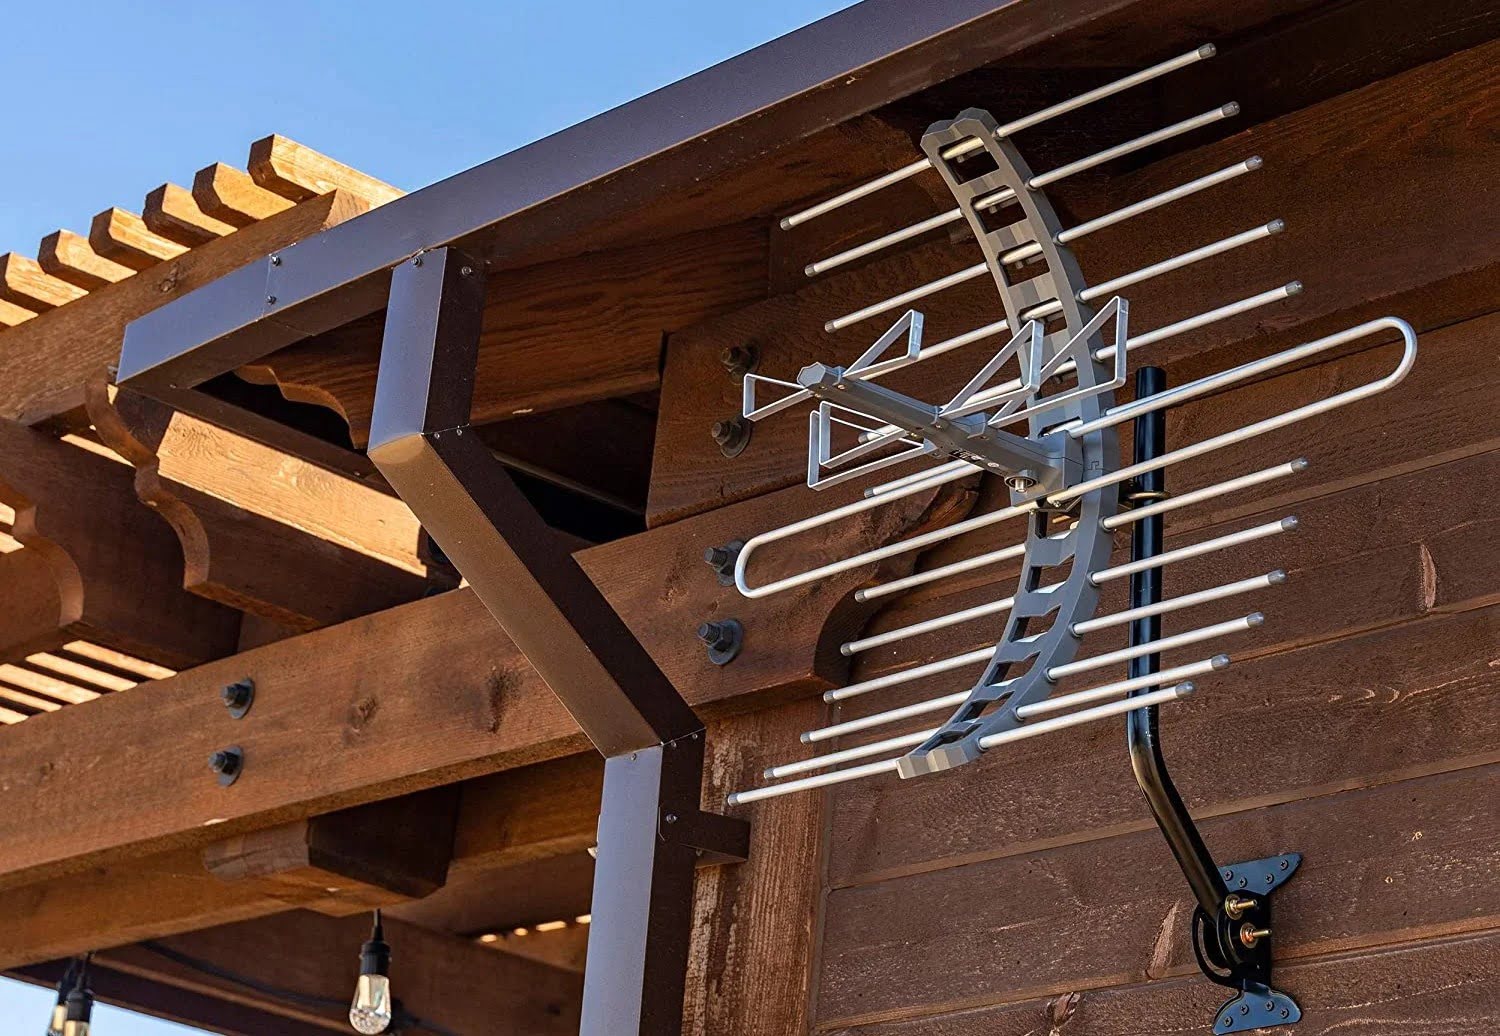 How To Get The Best Reception With An Outdoor Tv Antenna